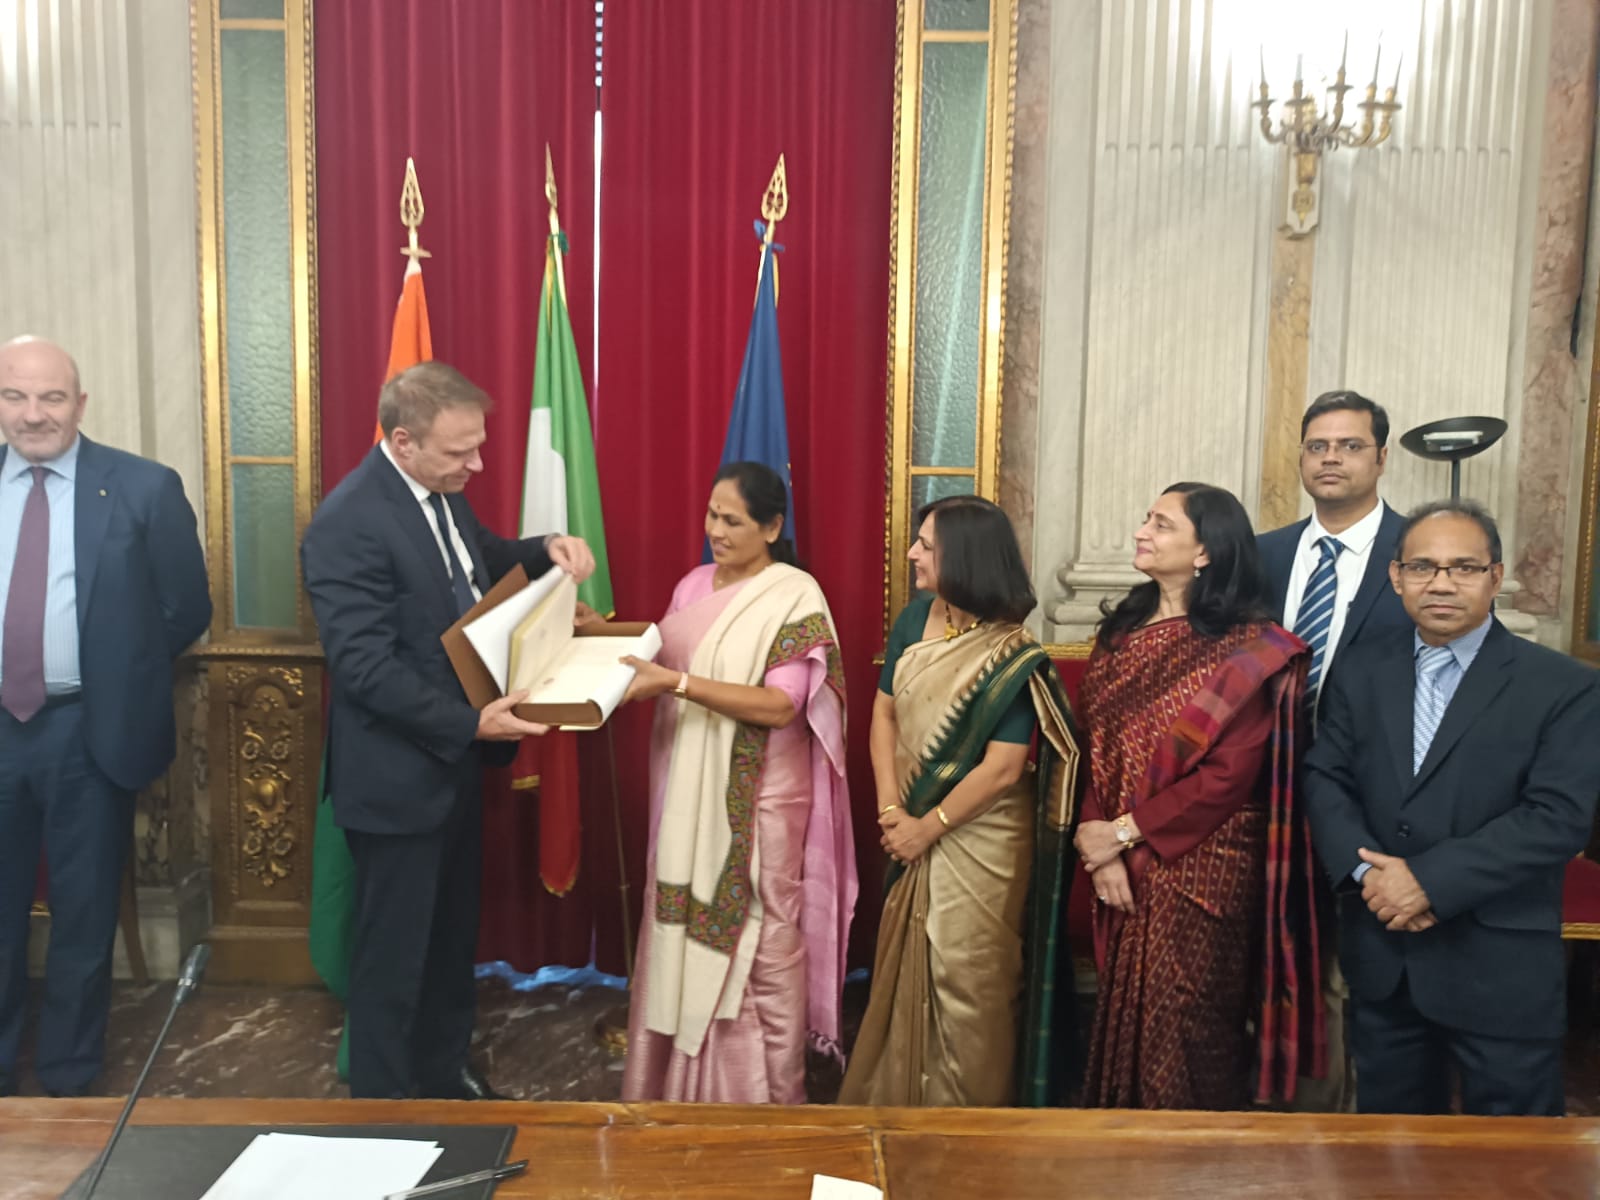 Meeting of Hon'ble Minister of State for Agriculture H.E. Ms. Shobha Karandlaje with Hon'ble Minister for Agriculture of Italy H.E. Mr. Francesco Lollobrigida 